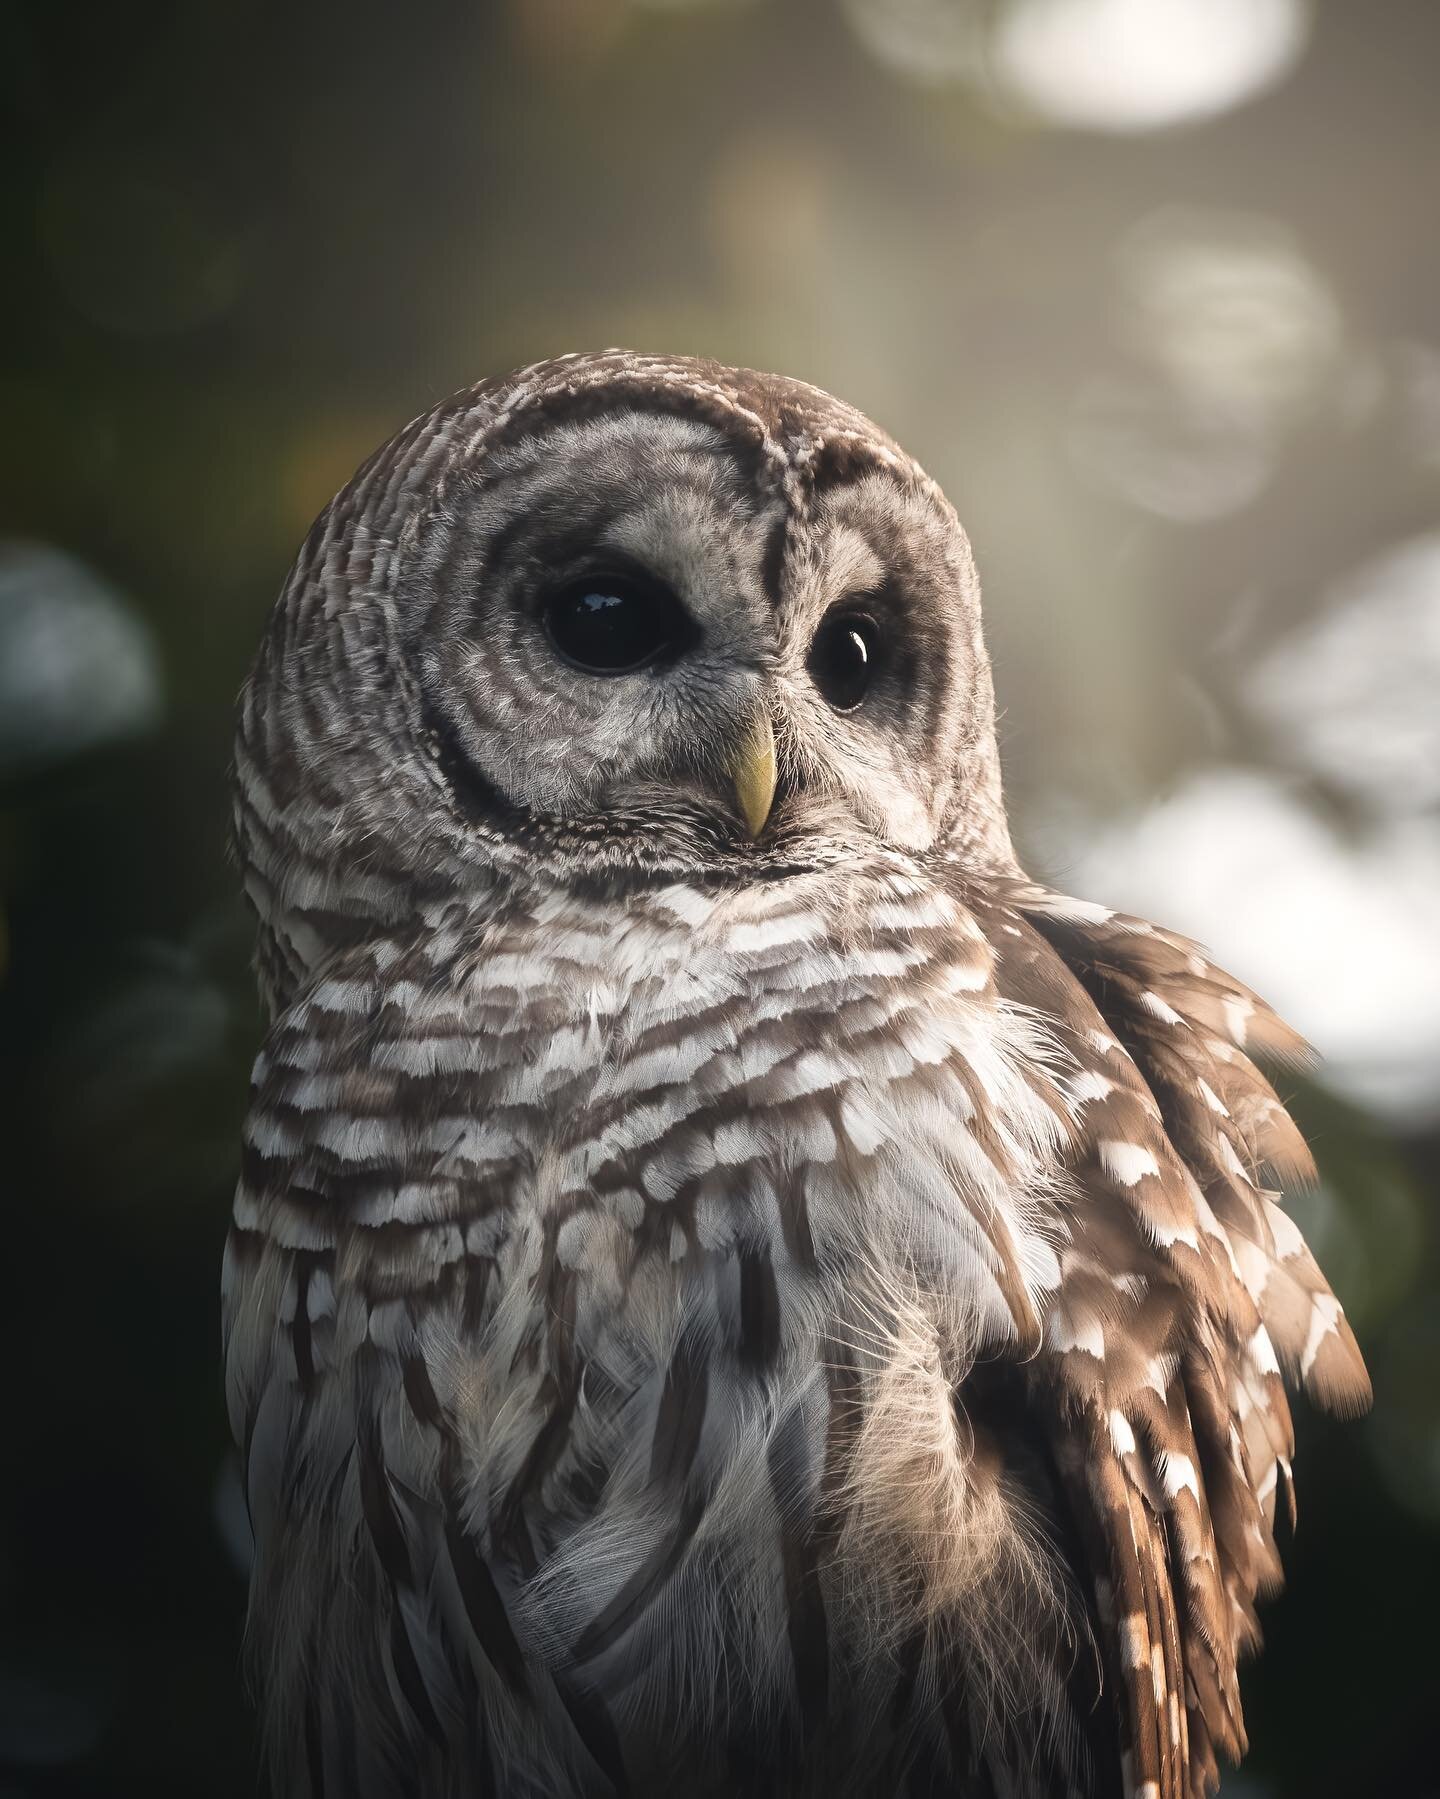 I&rsquo;ve been so lucky to spend a few evenings with a family of barred owls.  Although I&rsquo;ll never sleep again without reliving their screeches I enjoyed my time with all 5 of them. They come out right before dark and I was lucky to get this s